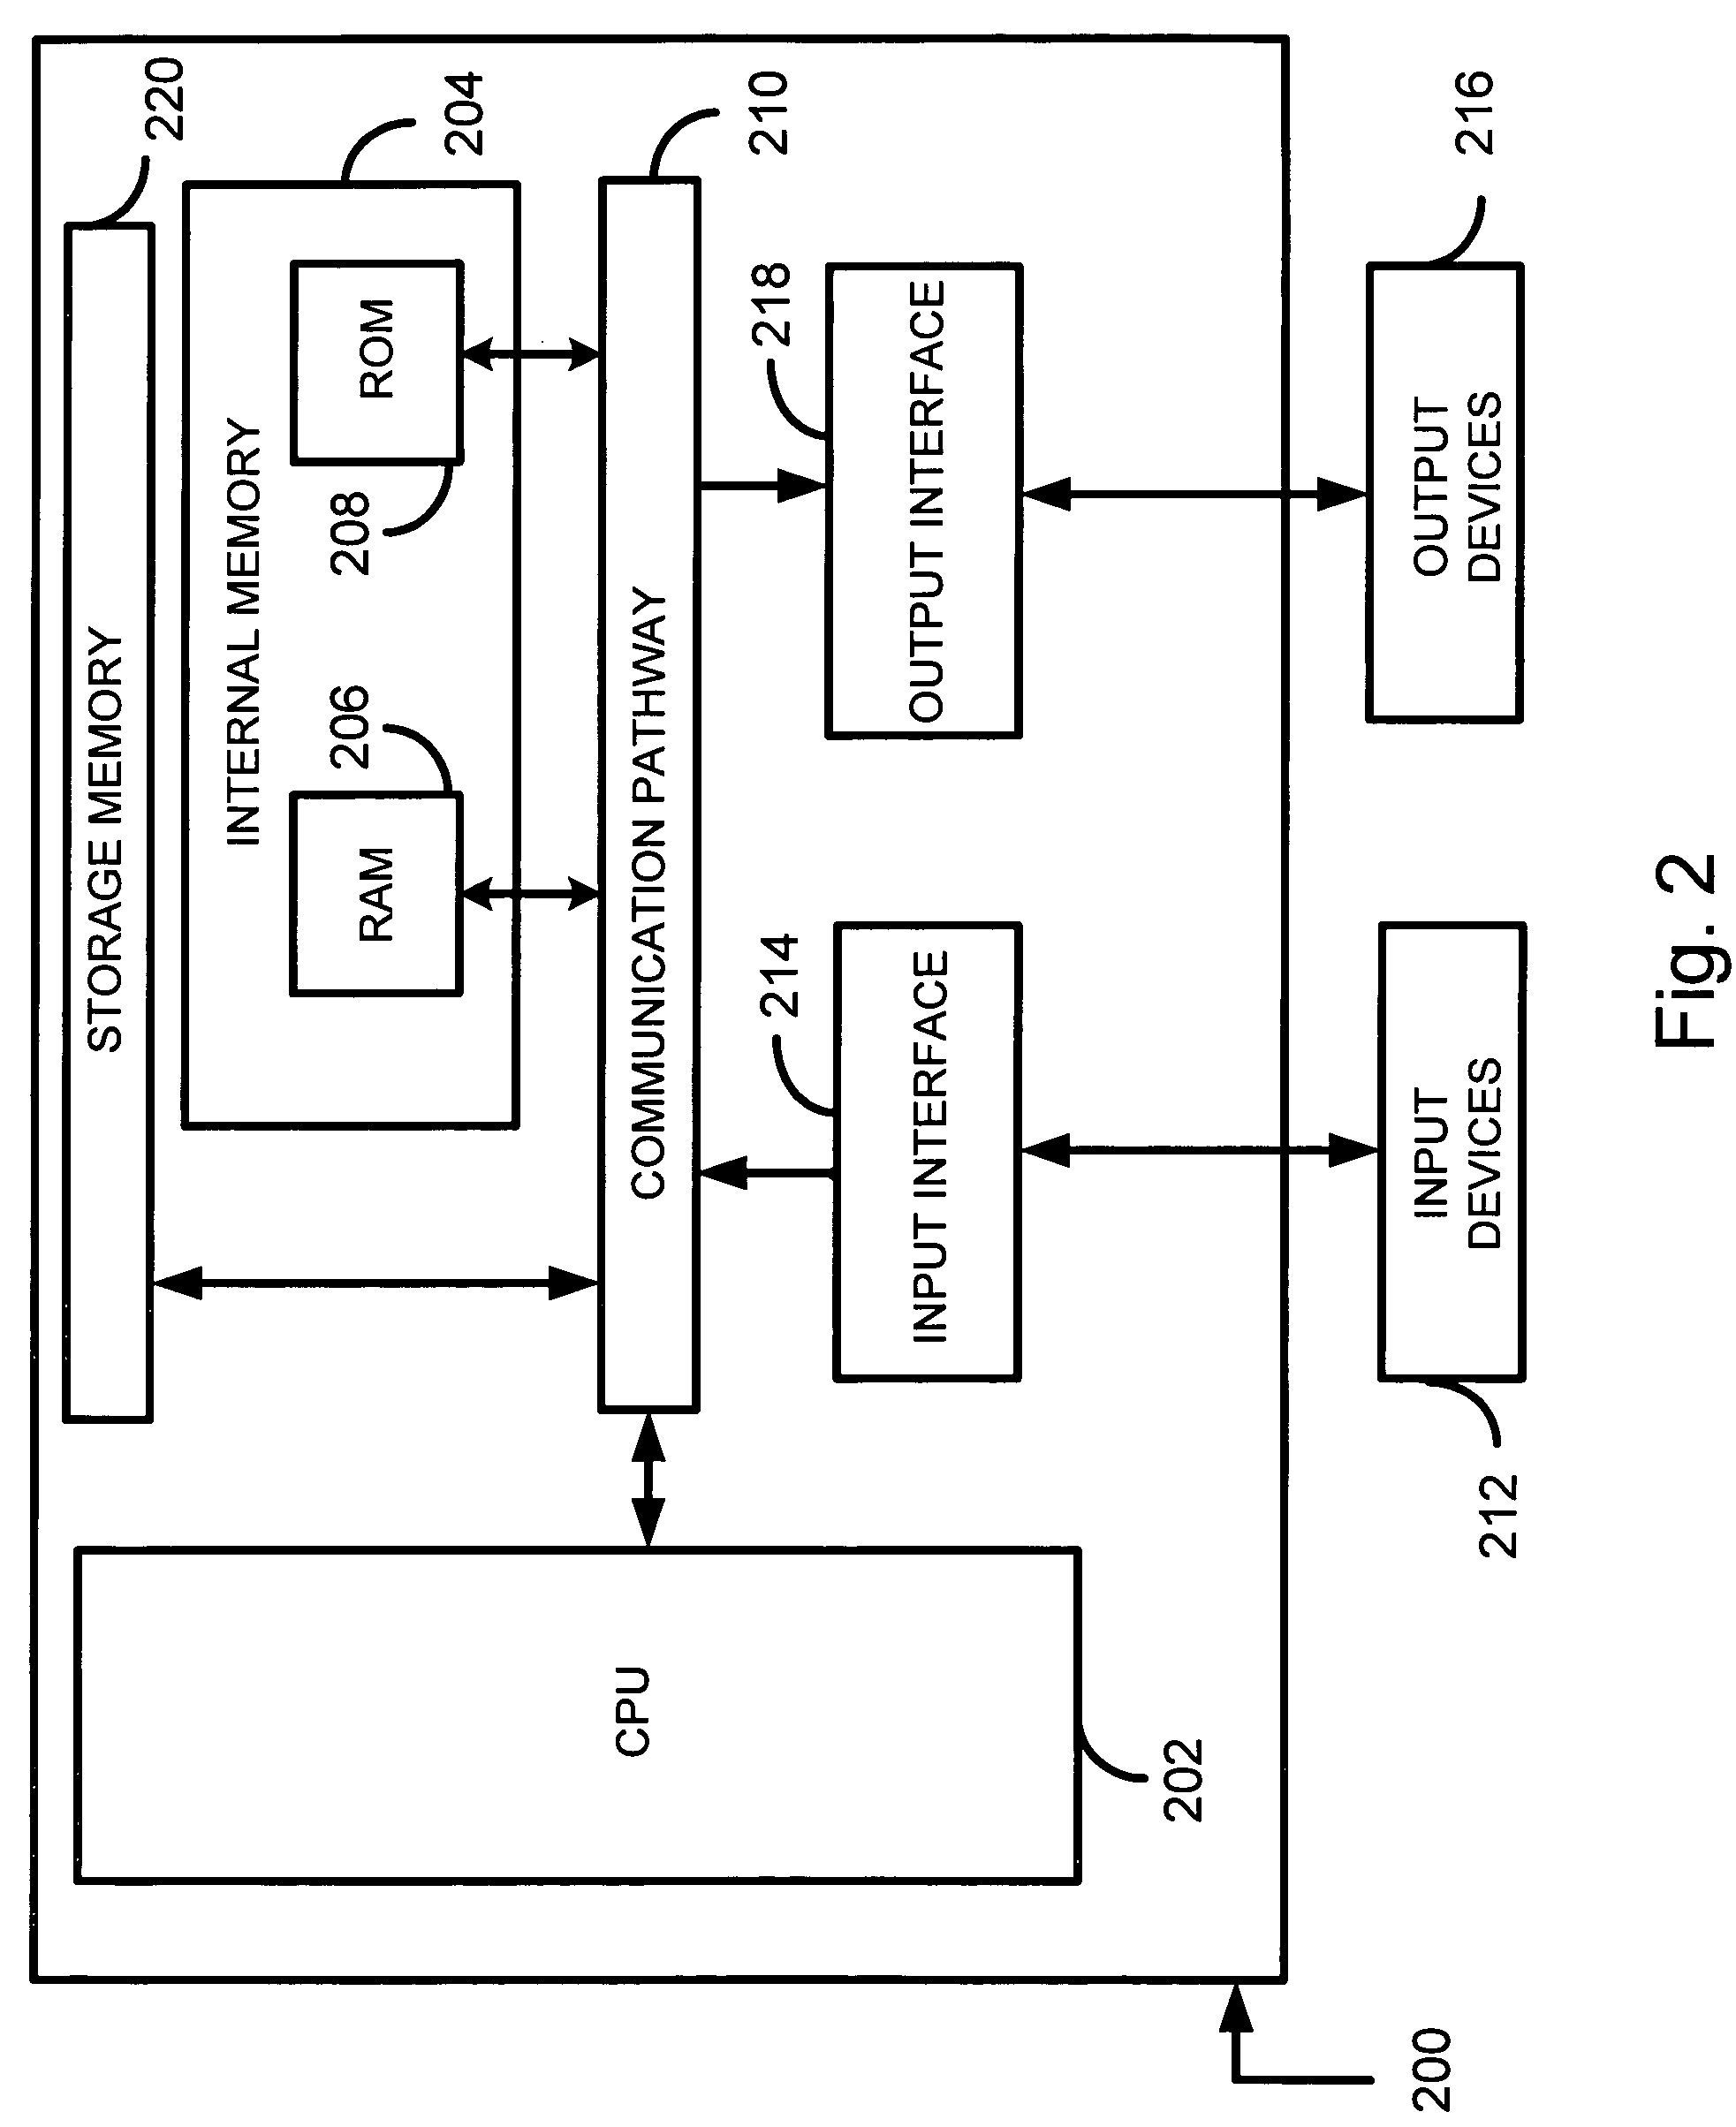 Method for redirection of web streaming clients using lightweight available bandwidth measurement from a plurality of servers